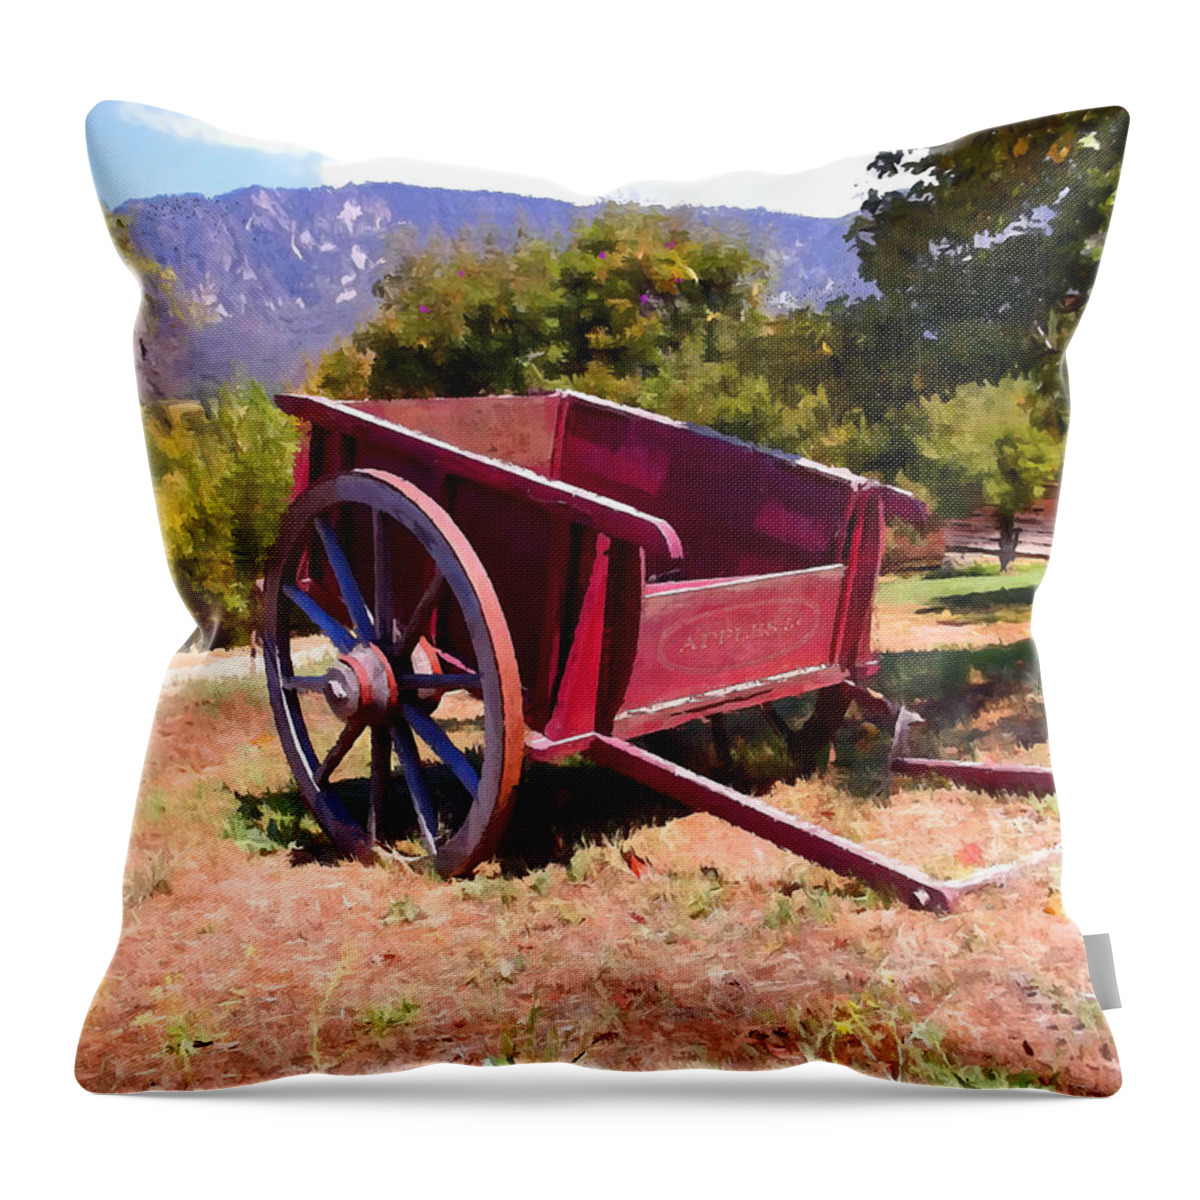 The Old Apple Cart Throw Pillow featuring the photograph The Old Apple Cart by Glenn McCarthy Art and Photography